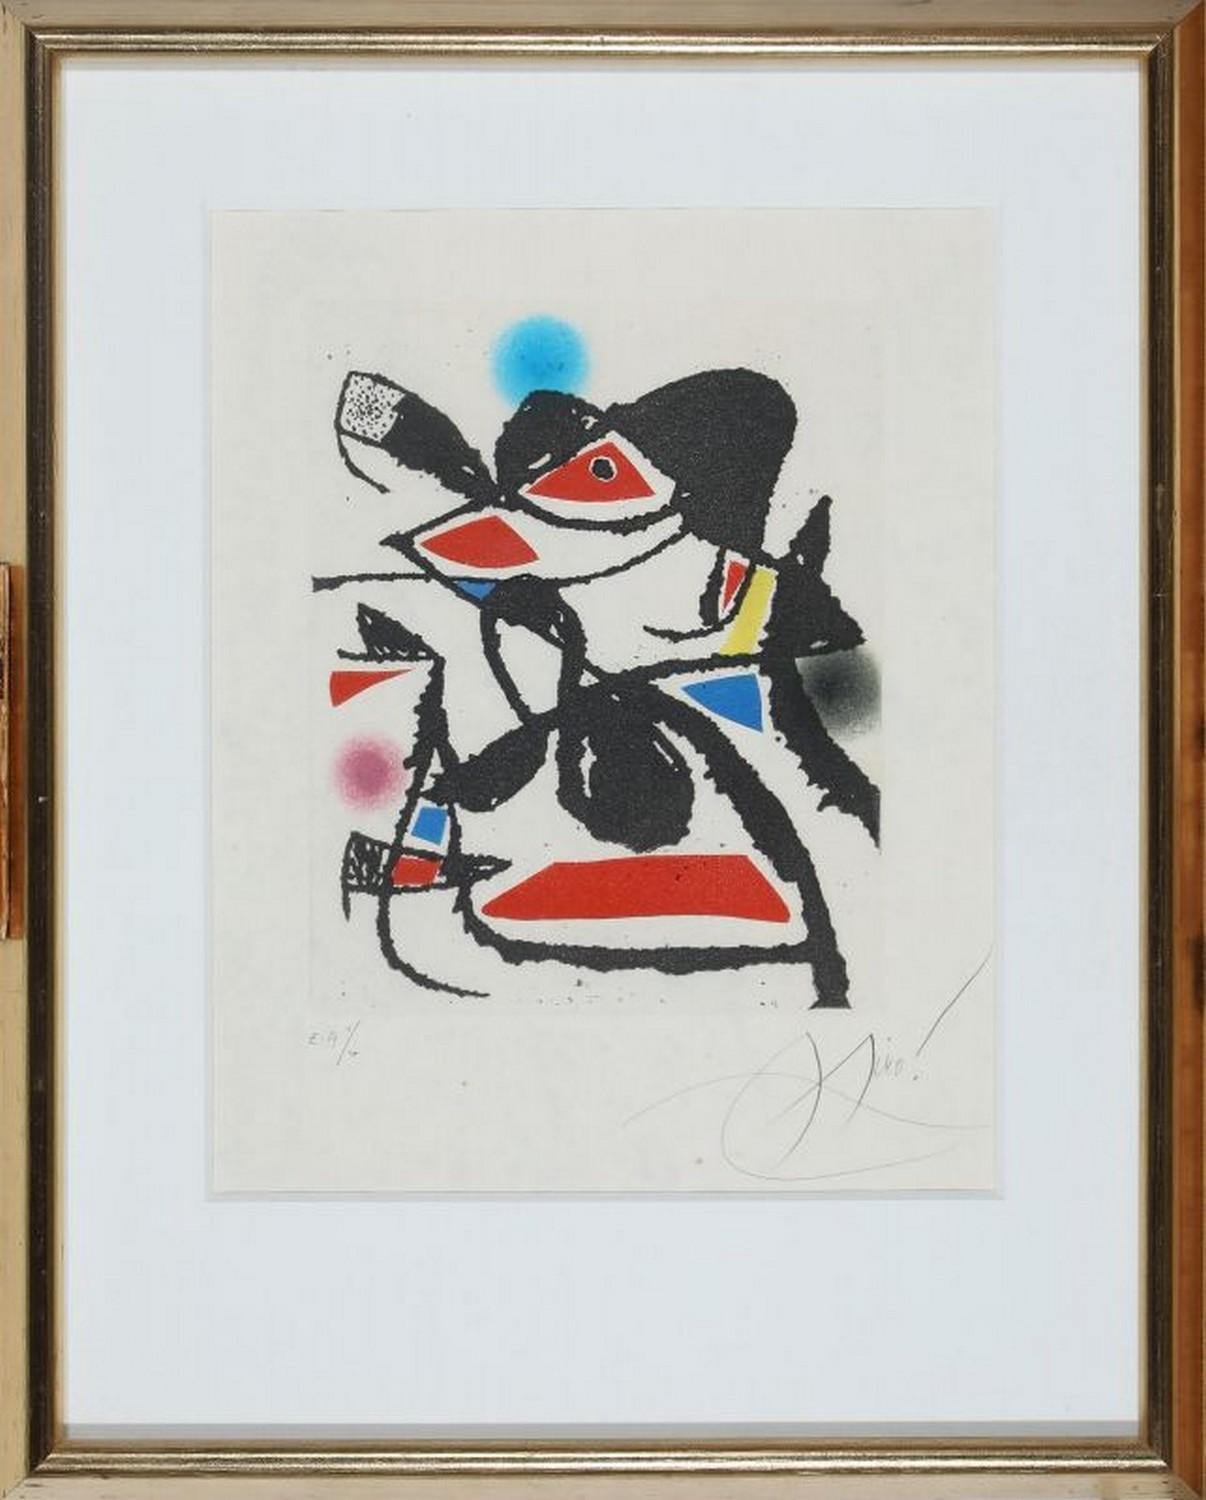 The hammer without a master  - Print by Joan Miró